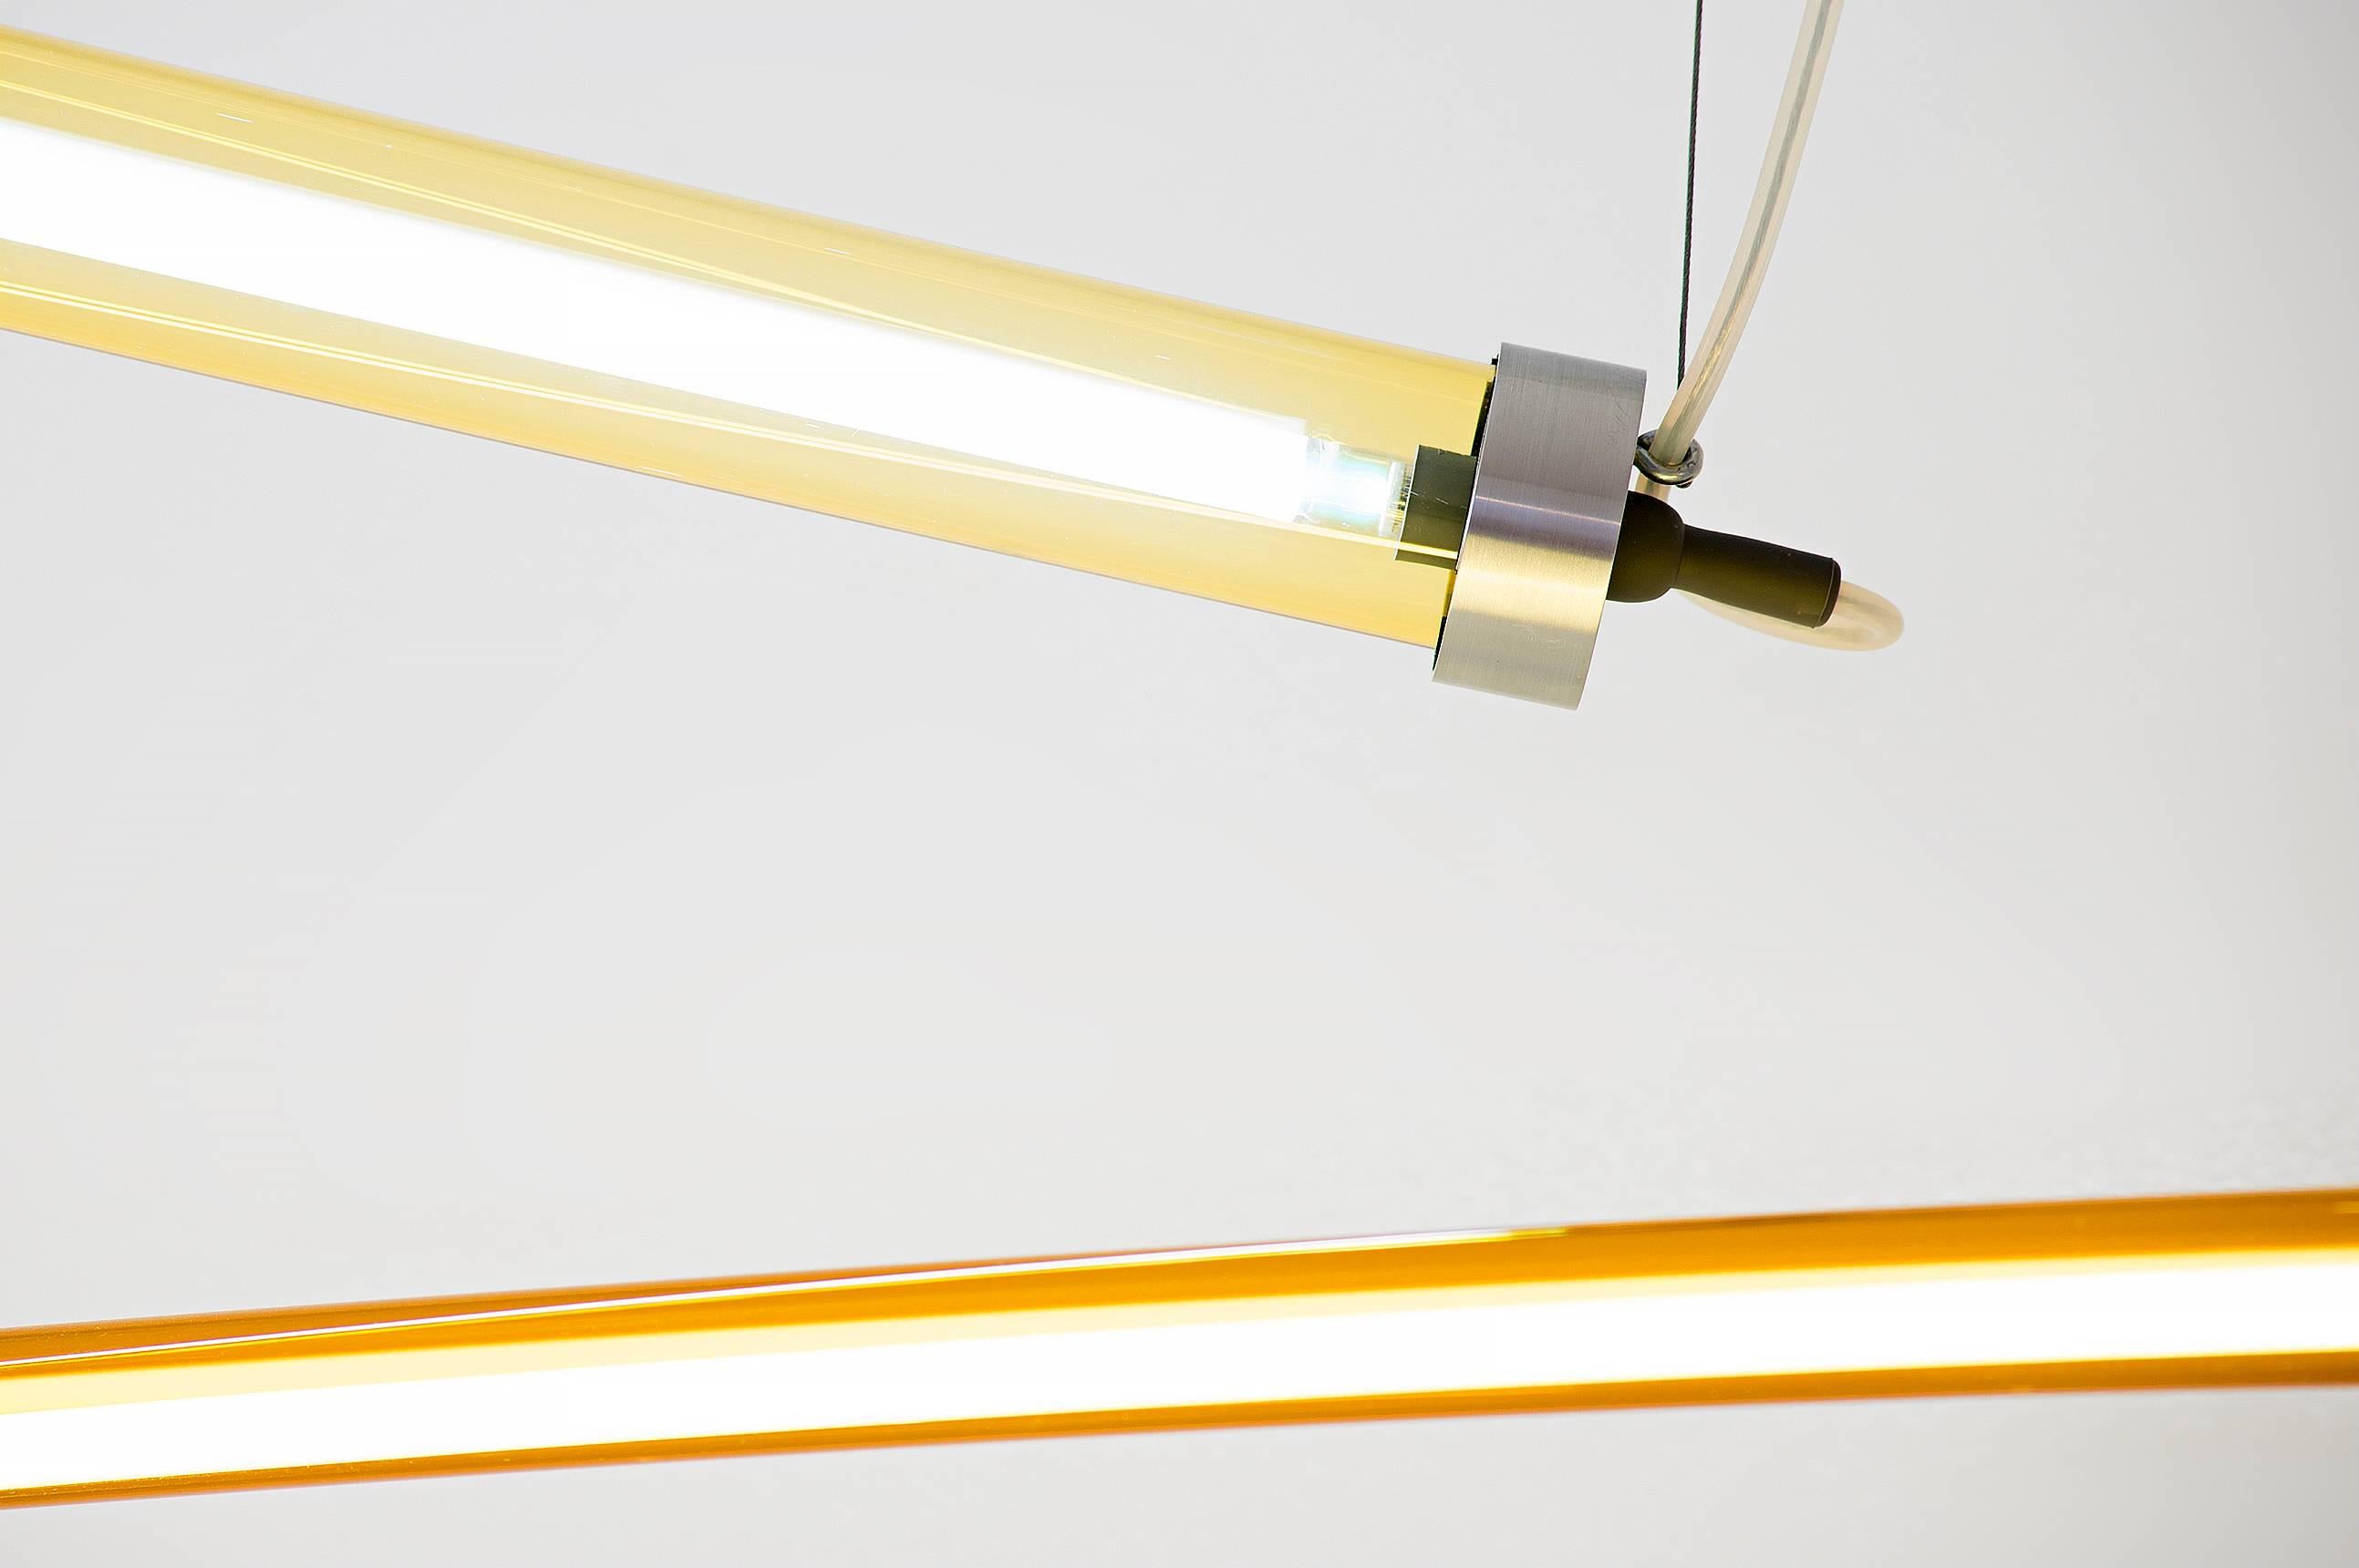 Sabine Marcelis

Ceiling lamps model “Horizontal Long”
From the series “RAY”
Manufactured by Sabine Marcelis
Produced in exclusive for side gallery
Rotterdam, The Netherlands 2017
Colored glass tubes, white neon

Measurements
190 cm x 0,6